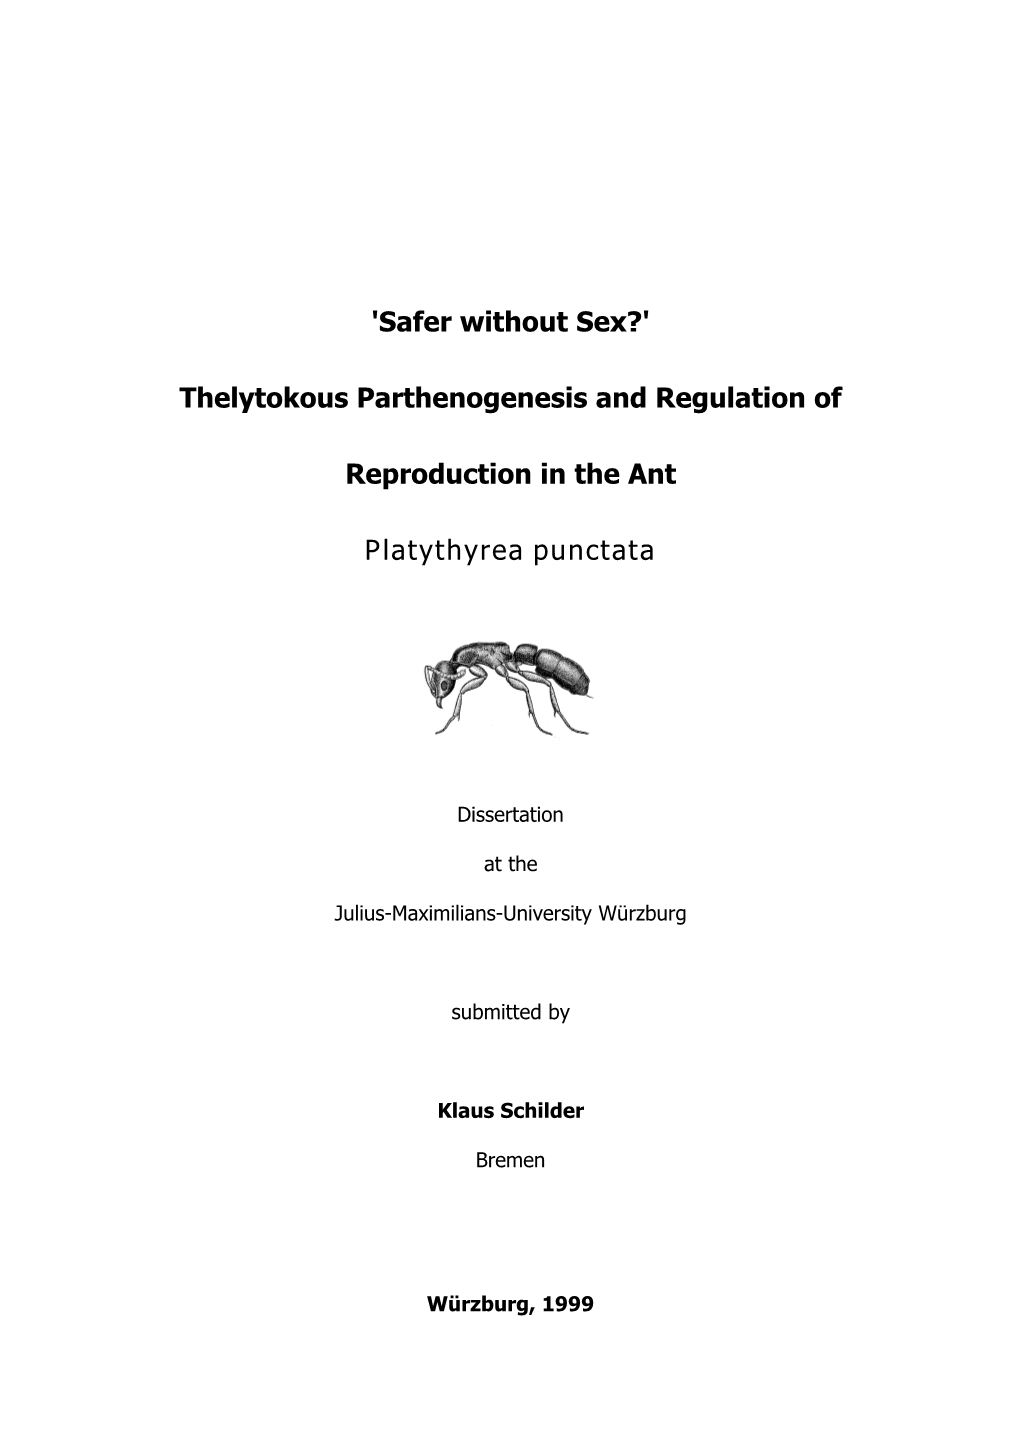 'Safer Without Sex?' Thelytokous Parthenogenesis and Regulation Of